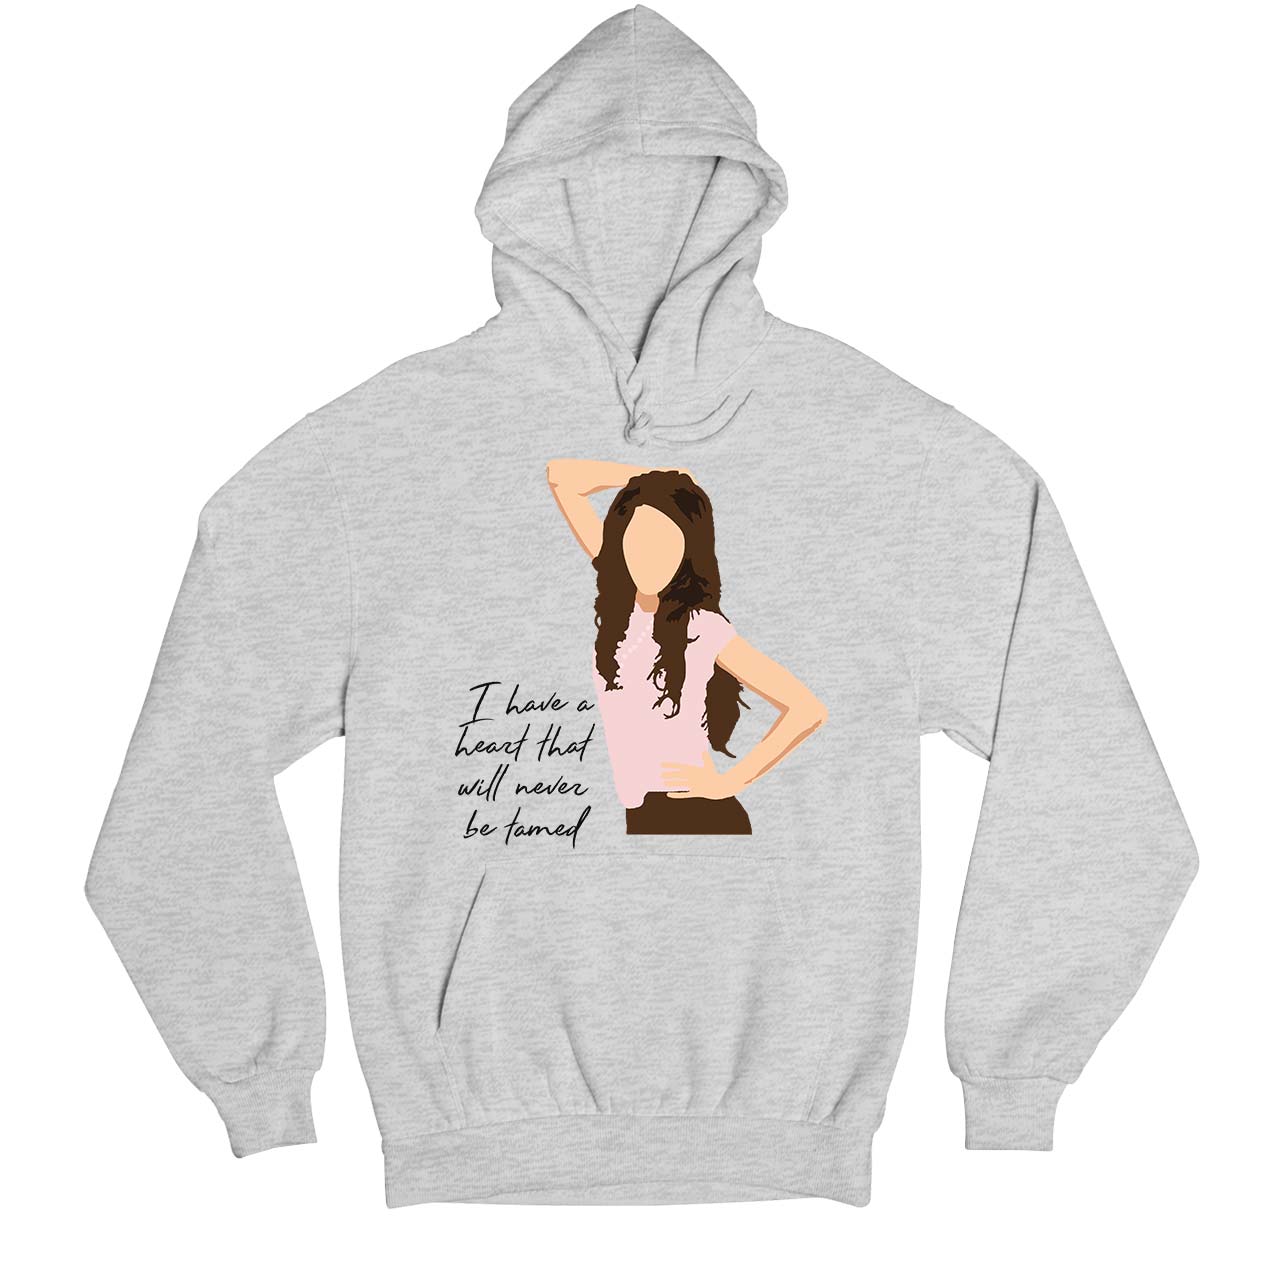 miley cyrus see you again hoodie hooded sweatshirt winterwear music band buy online usa united states of america the banyan tee tbt men women girls boys unisex gray i have a heart that will never be tamed